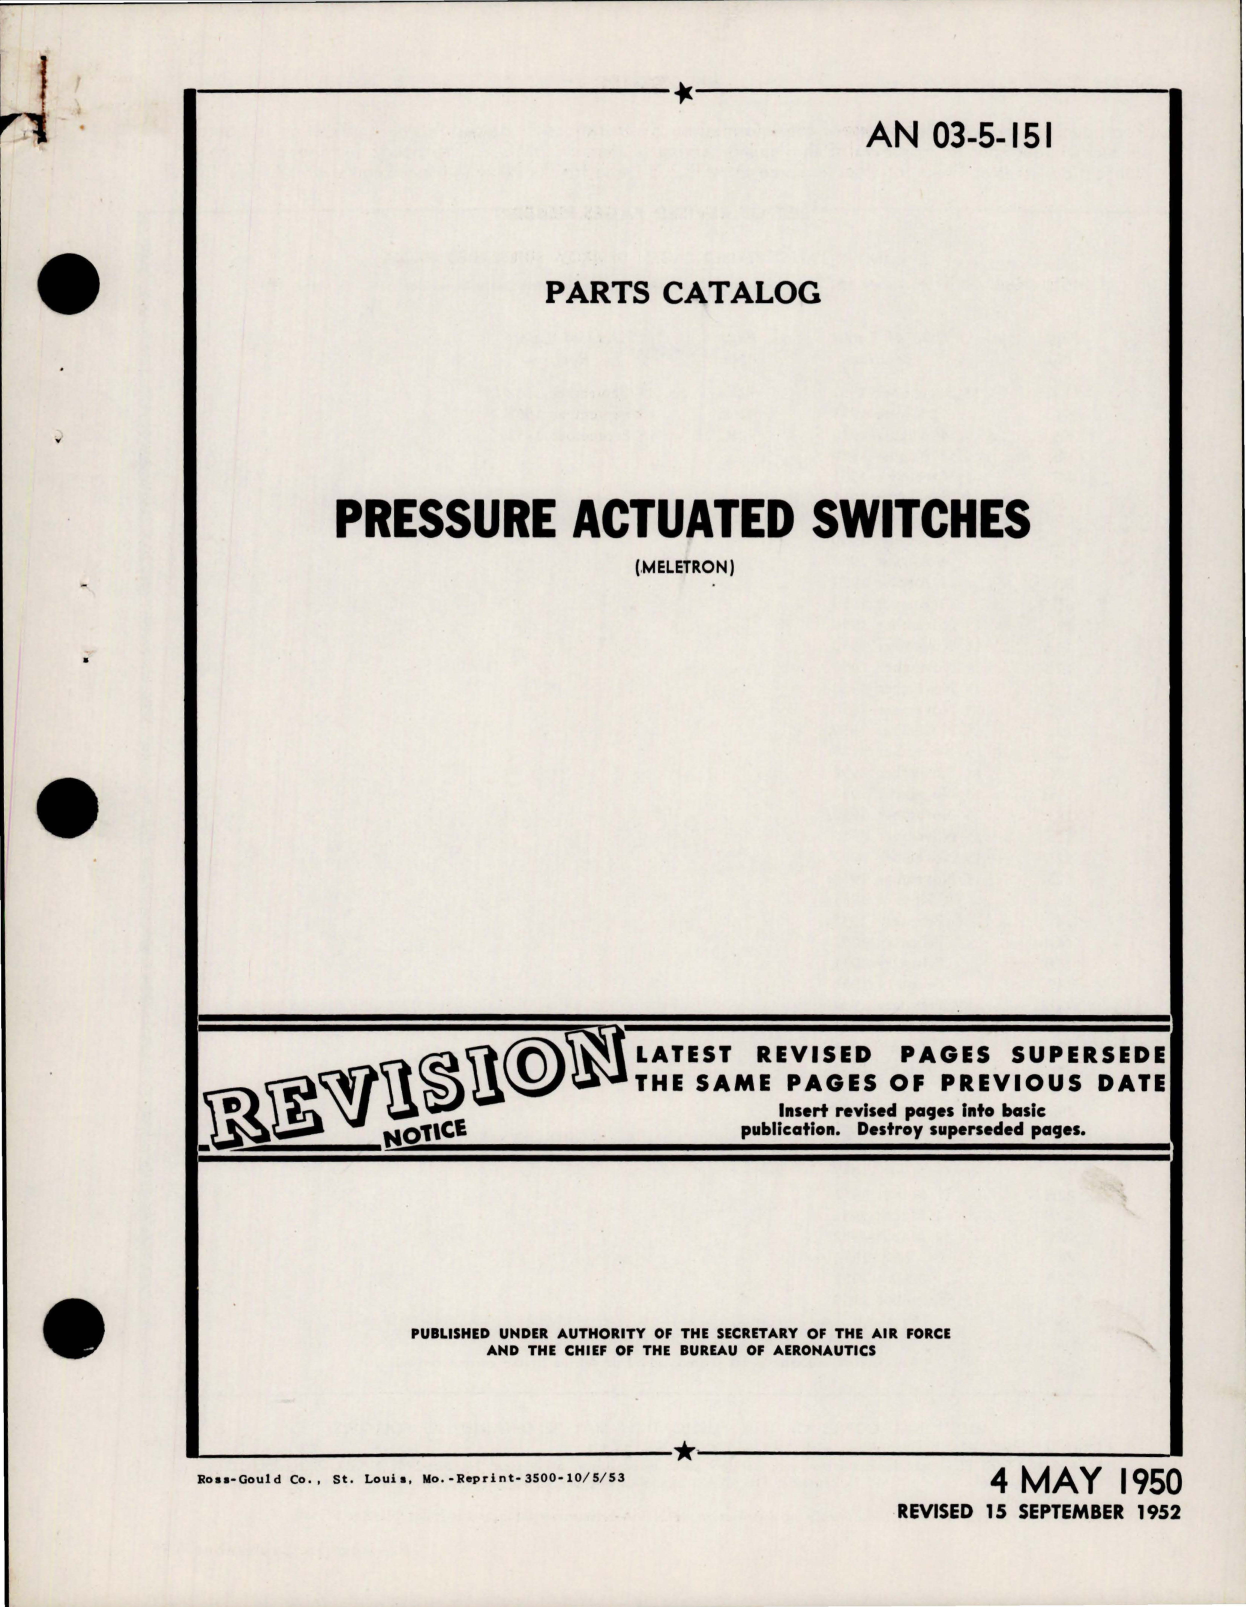 Sample page 1 from AirCorps Library document: Parts Catalog for Pressure Actuated Switches